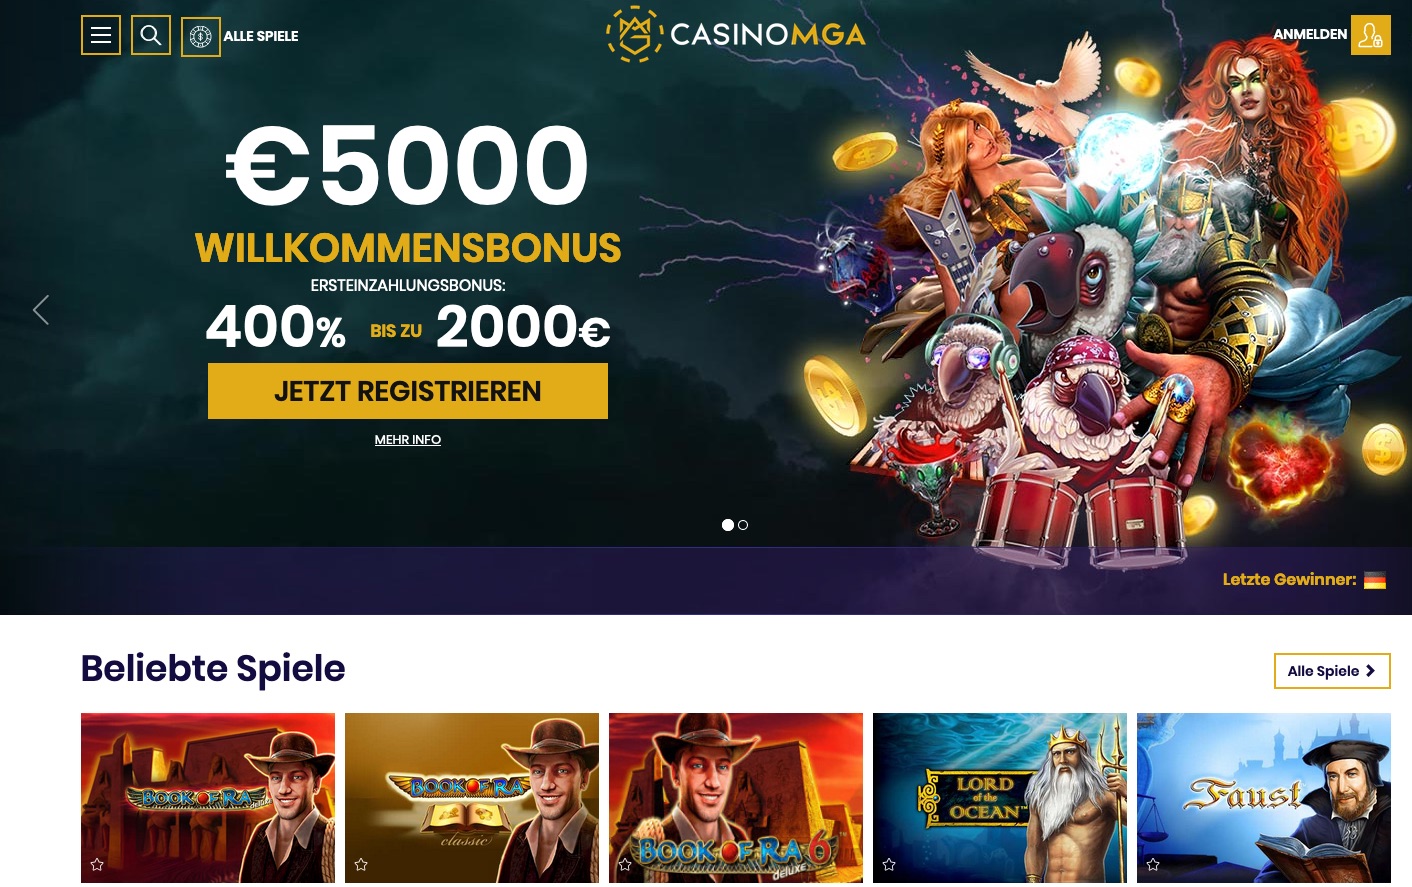 Online Casino Echtgeld spielen: Do You Really Need It? This Will Help You Decide!